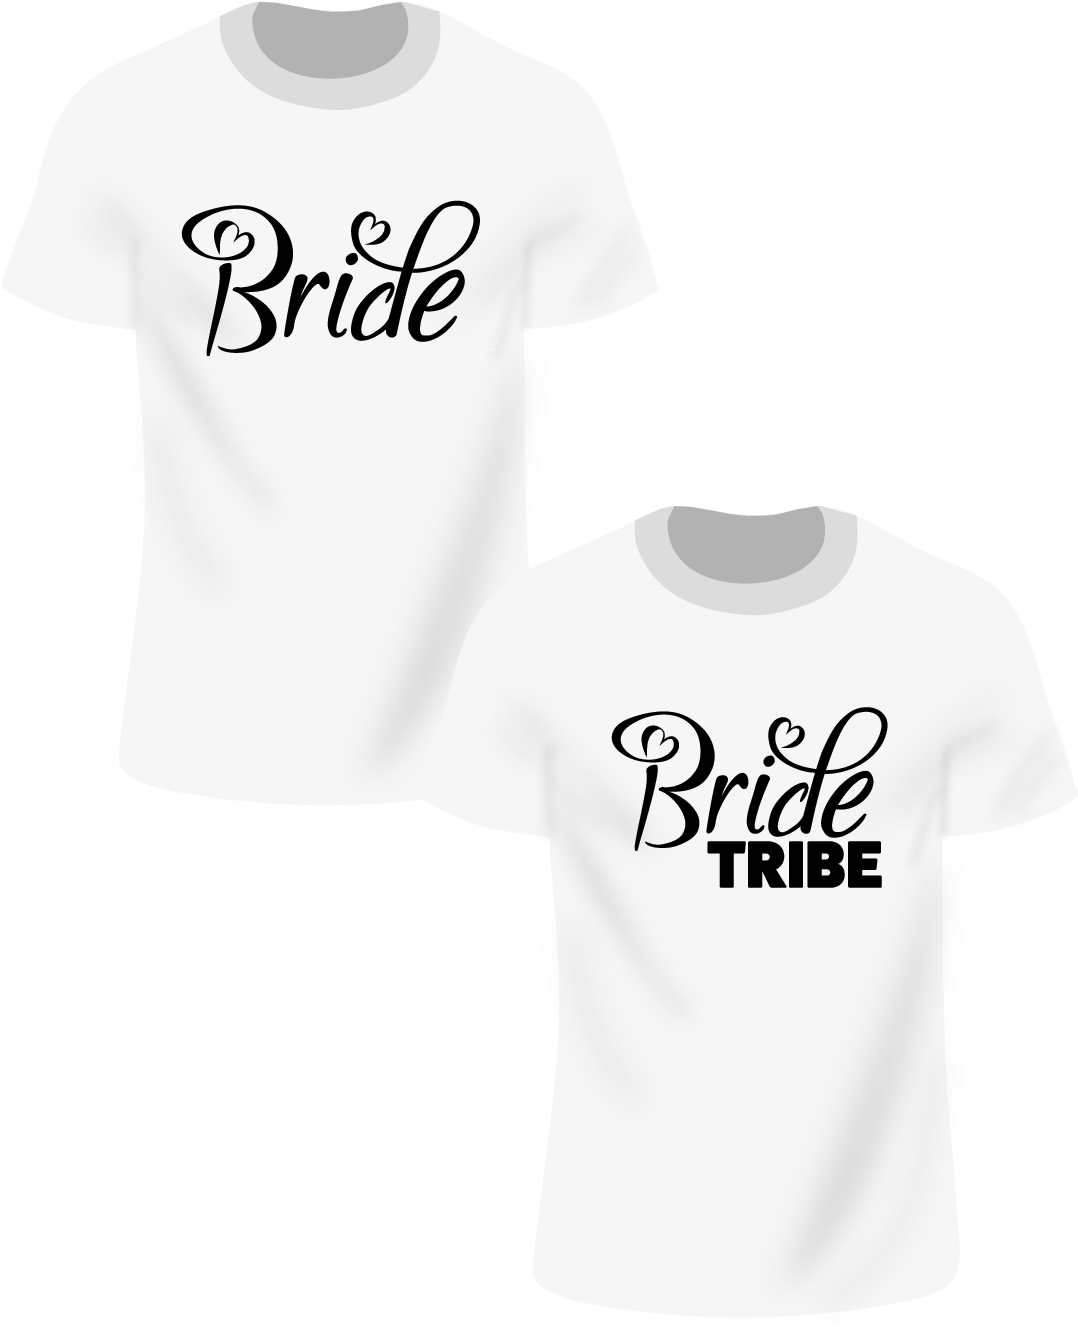 Brideand Bride Tribe T Shirts PNG